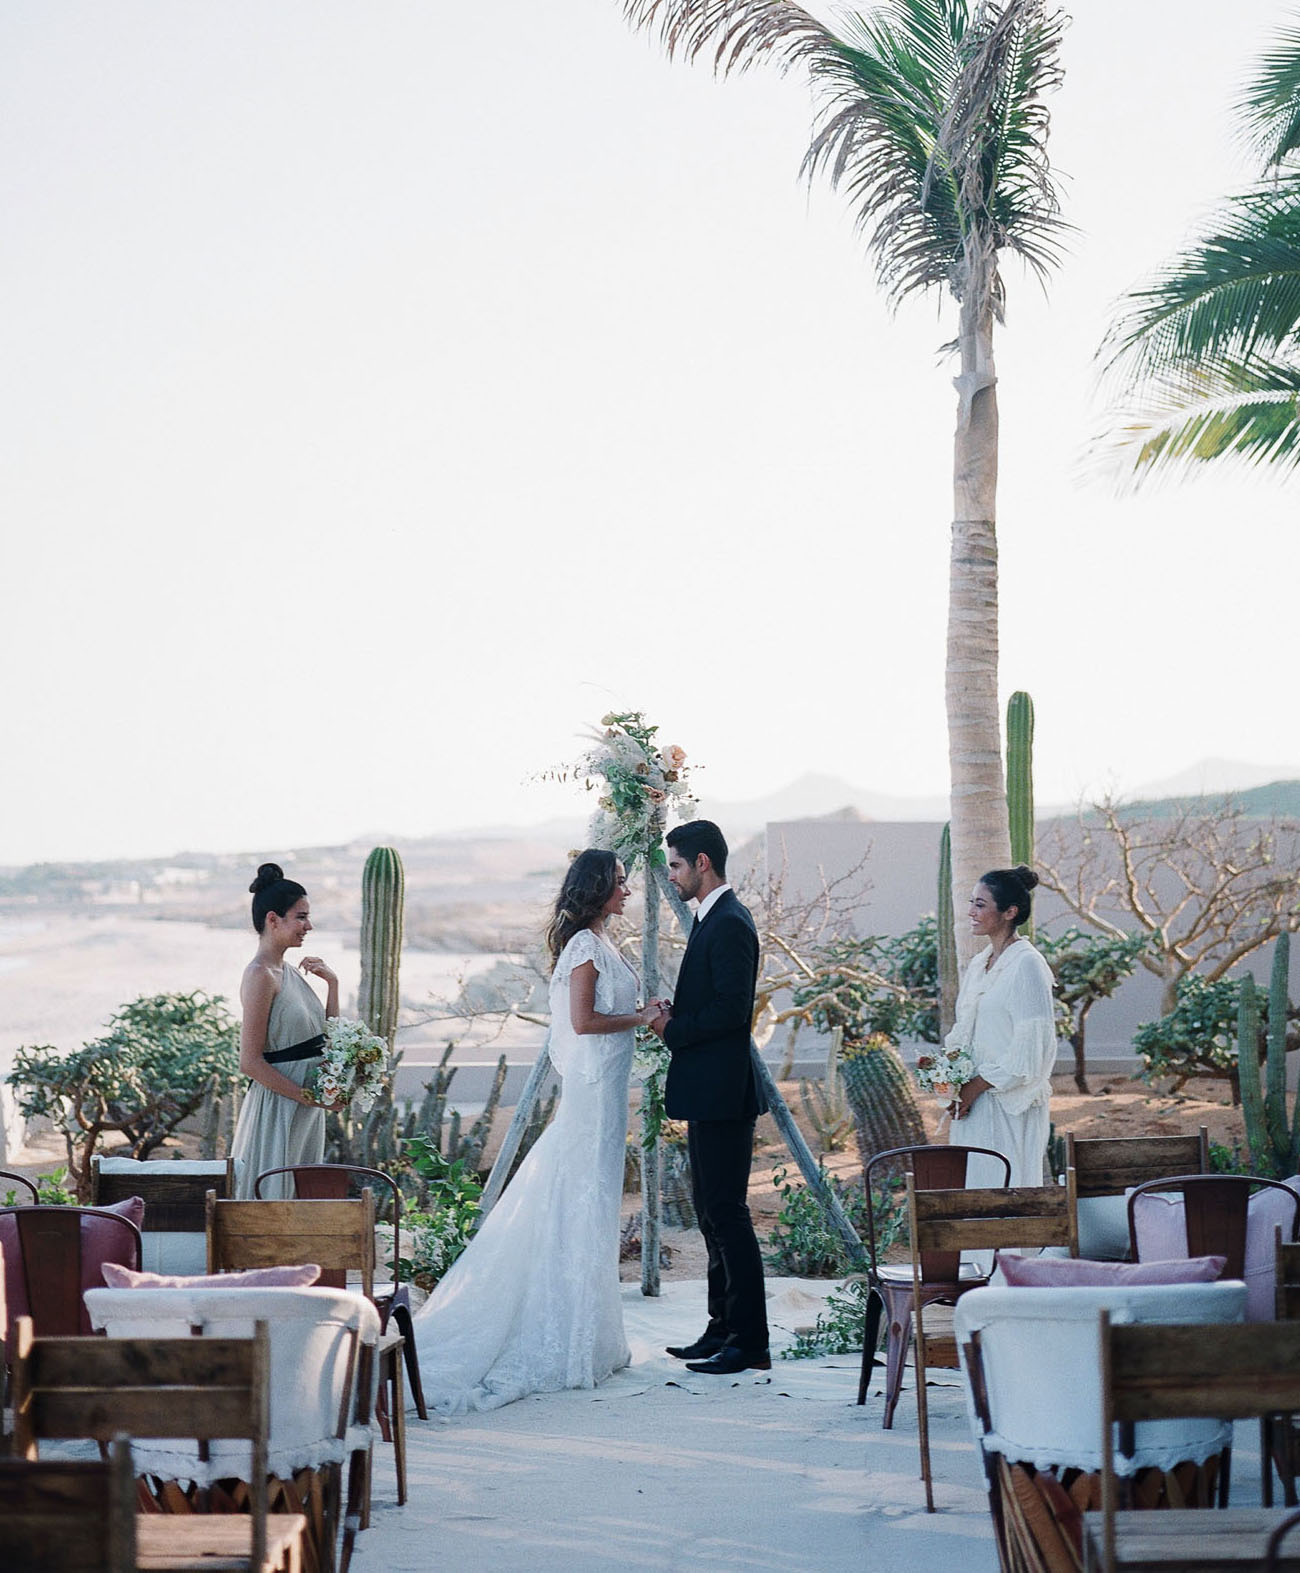 The ceremony space was a boho one, with mismatching chairs, a triangle arch, cacti and a gorgeous beach view